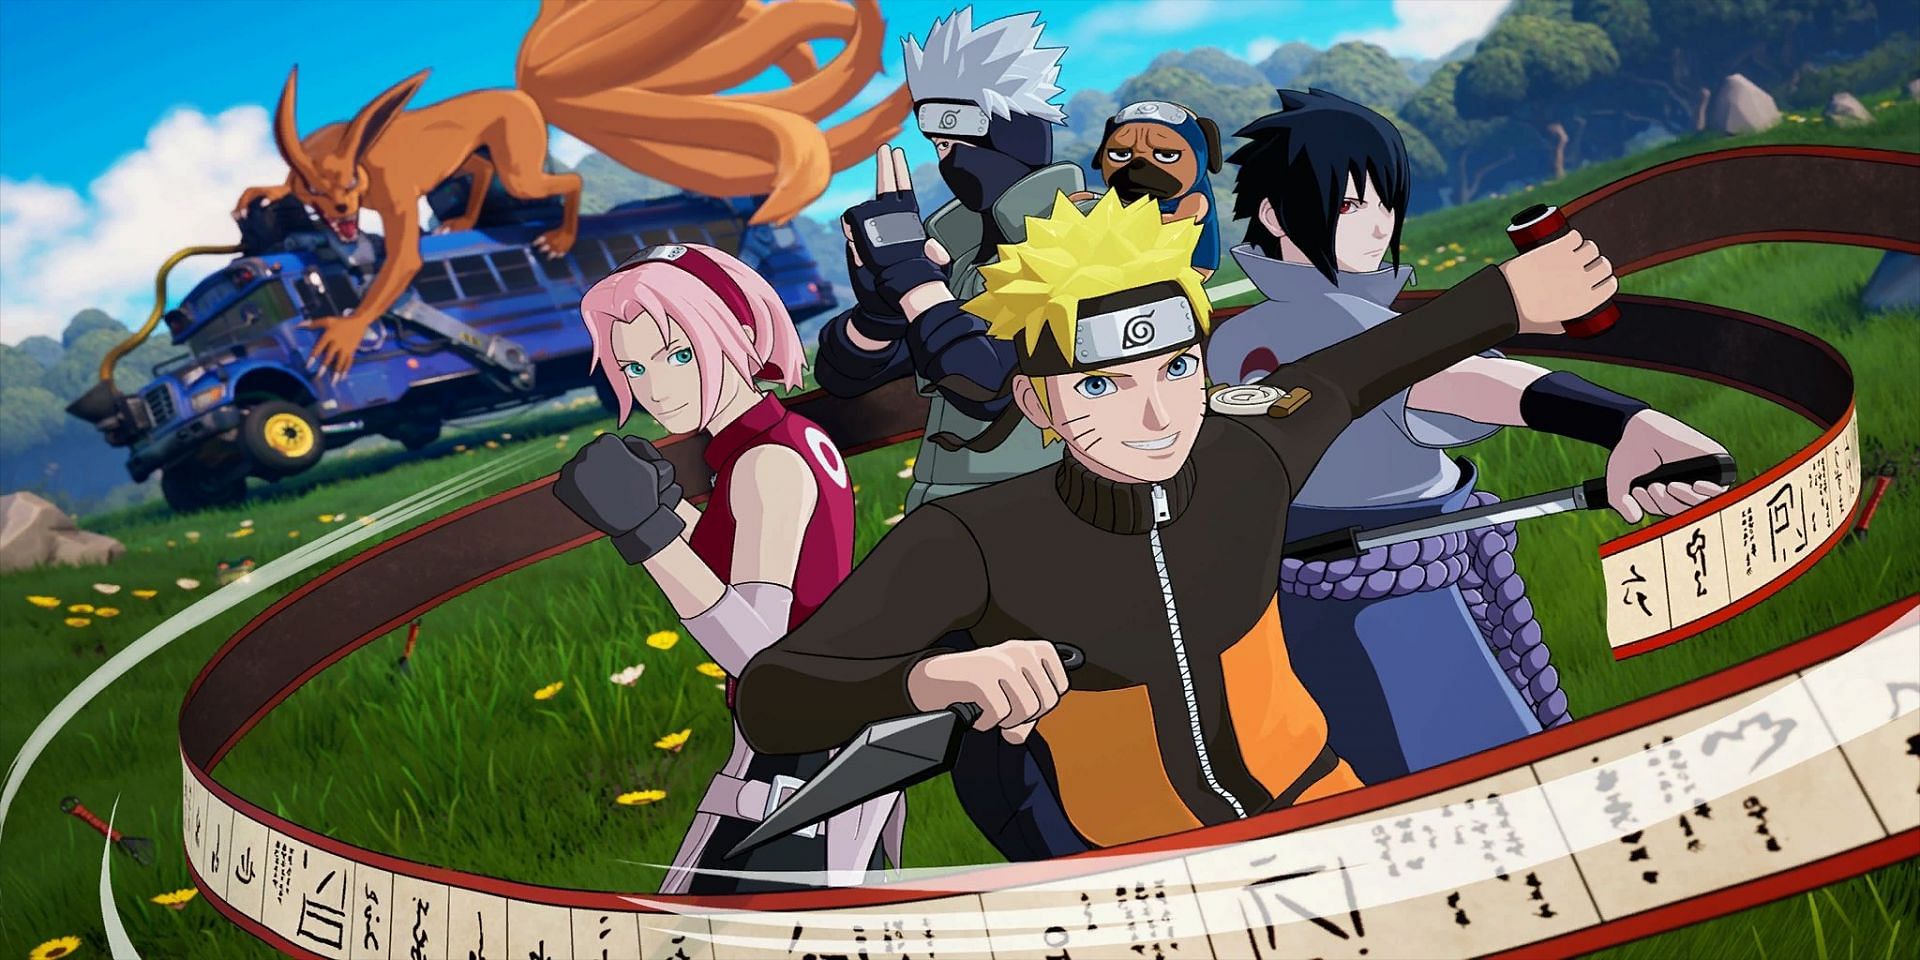 Fortnite x Naruto collab has four new exclusive skins (Image via Epic Games)